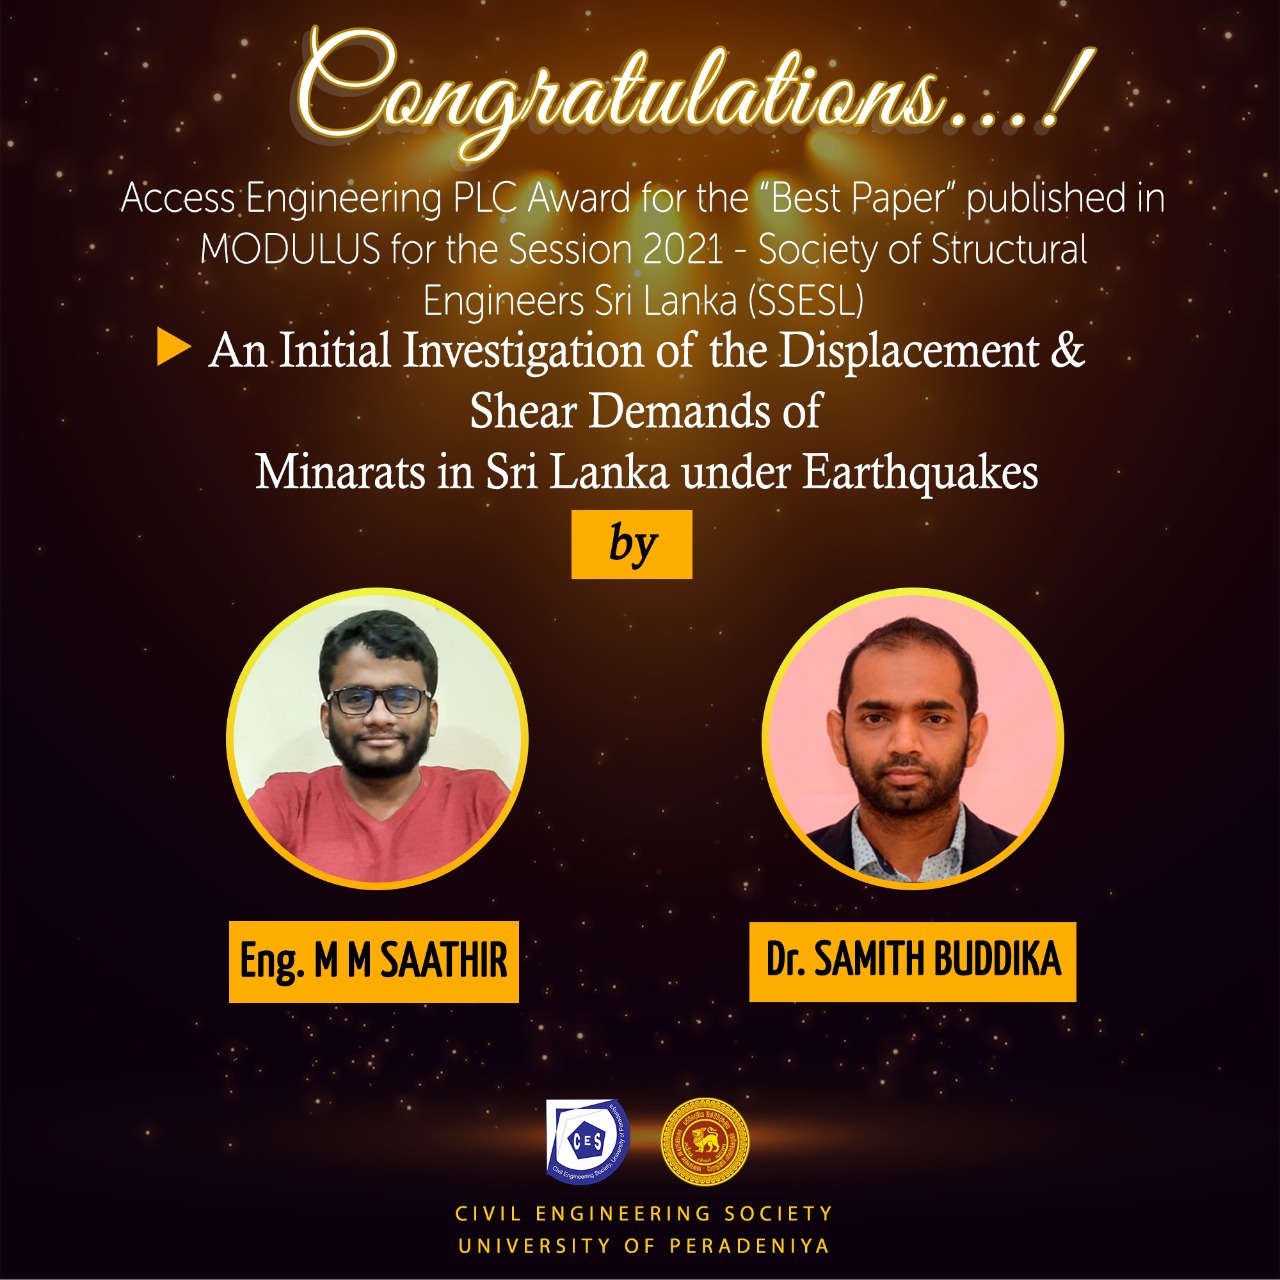 Eng. M.M. Saathir and Dr. Samith Buddika published in the SSESL Modulus of June 2021 has won the Access
Engineering PLC Award for the “Best Paper” published in MODULUS for the Session 2021